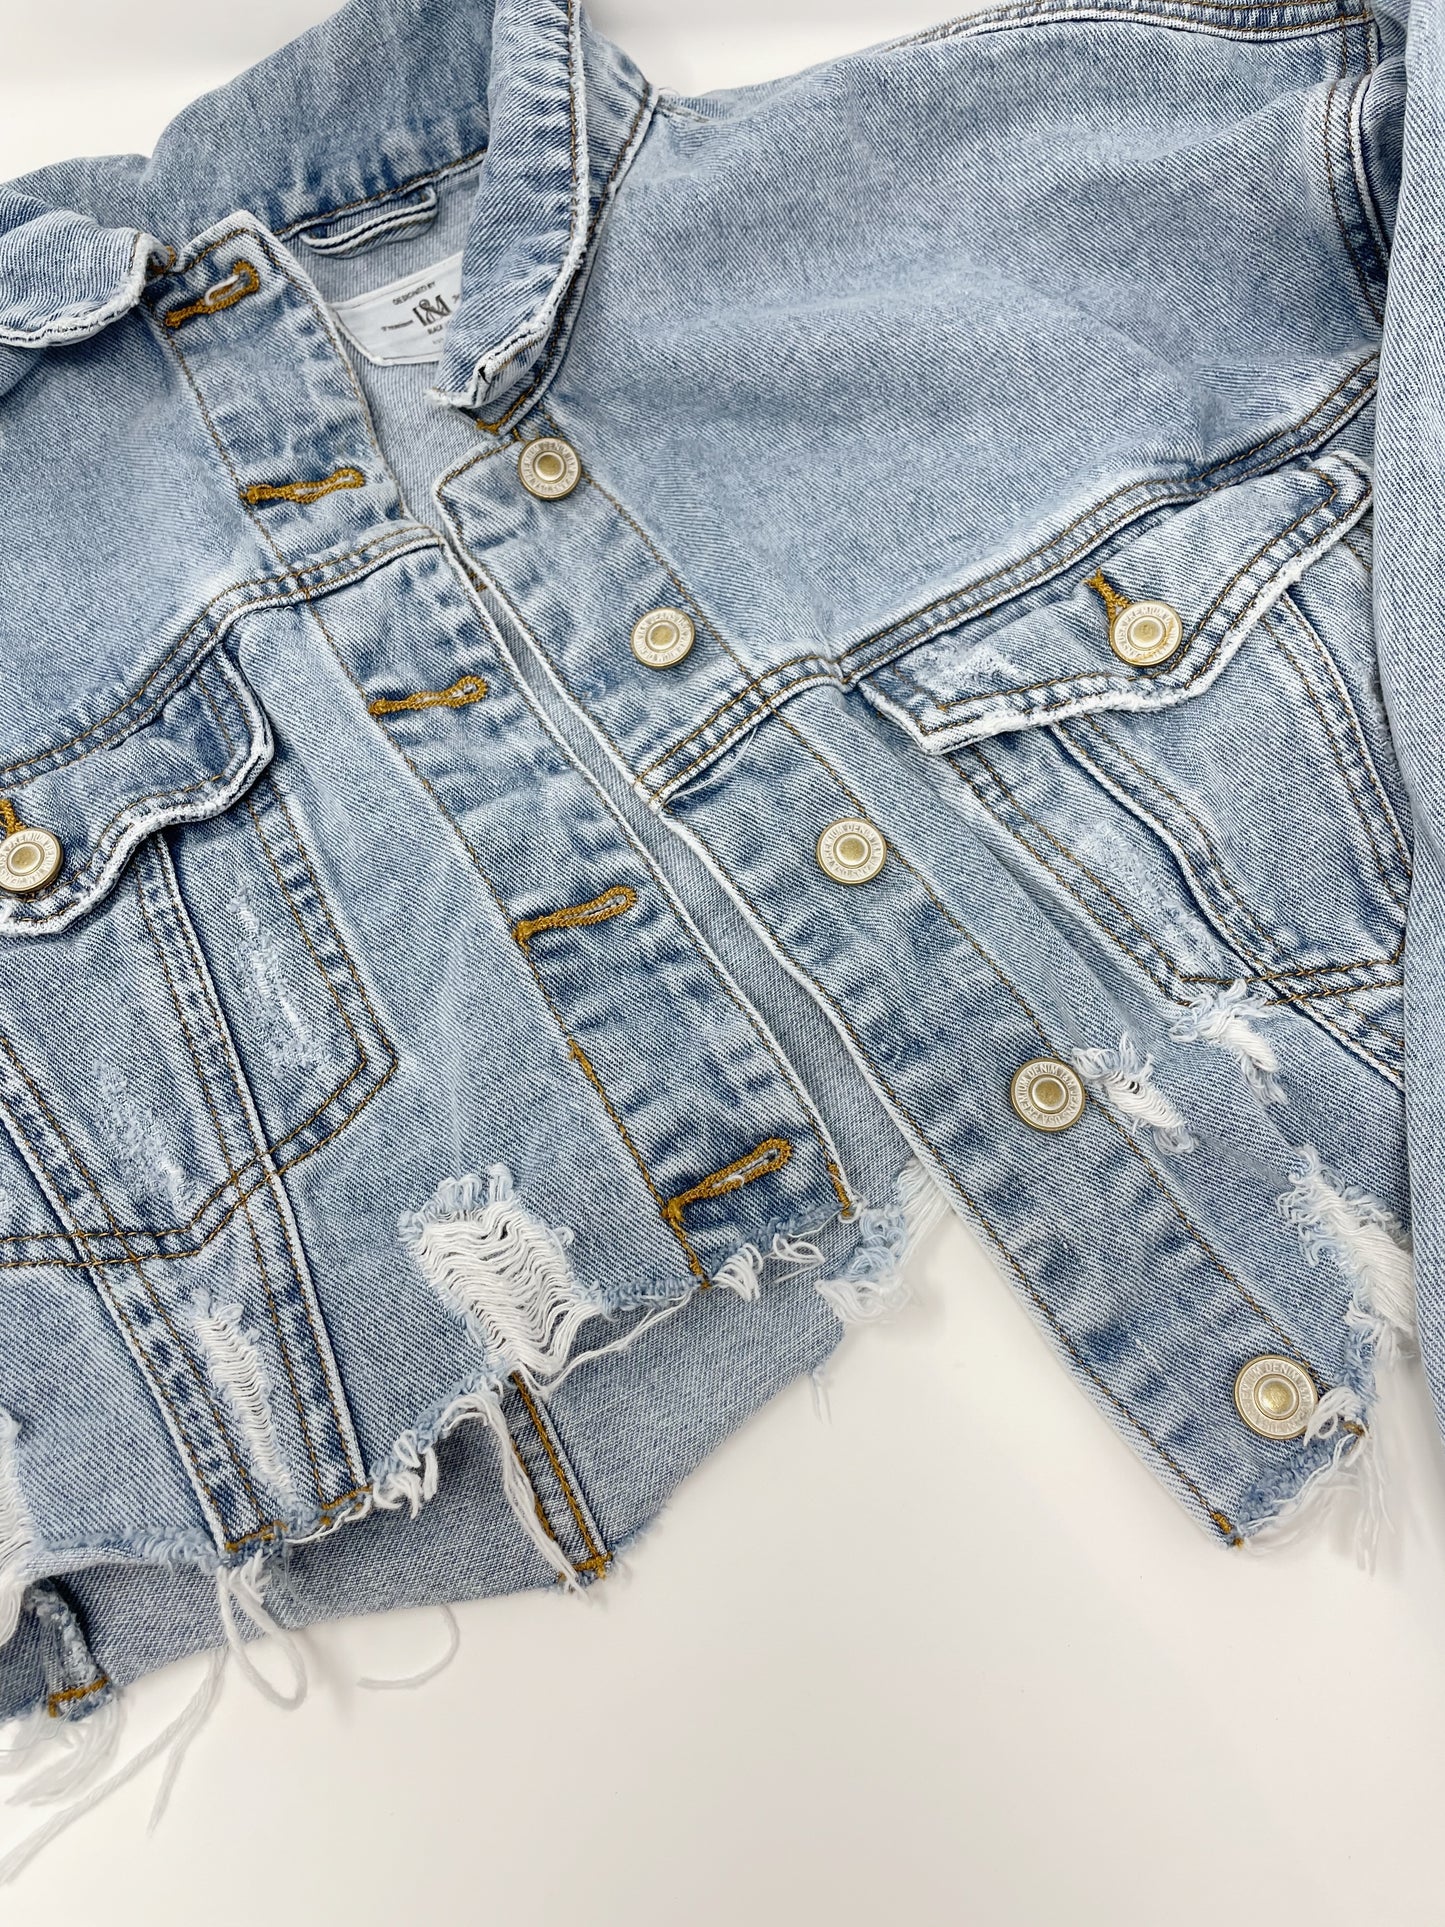 The Cropped Jean Jacket